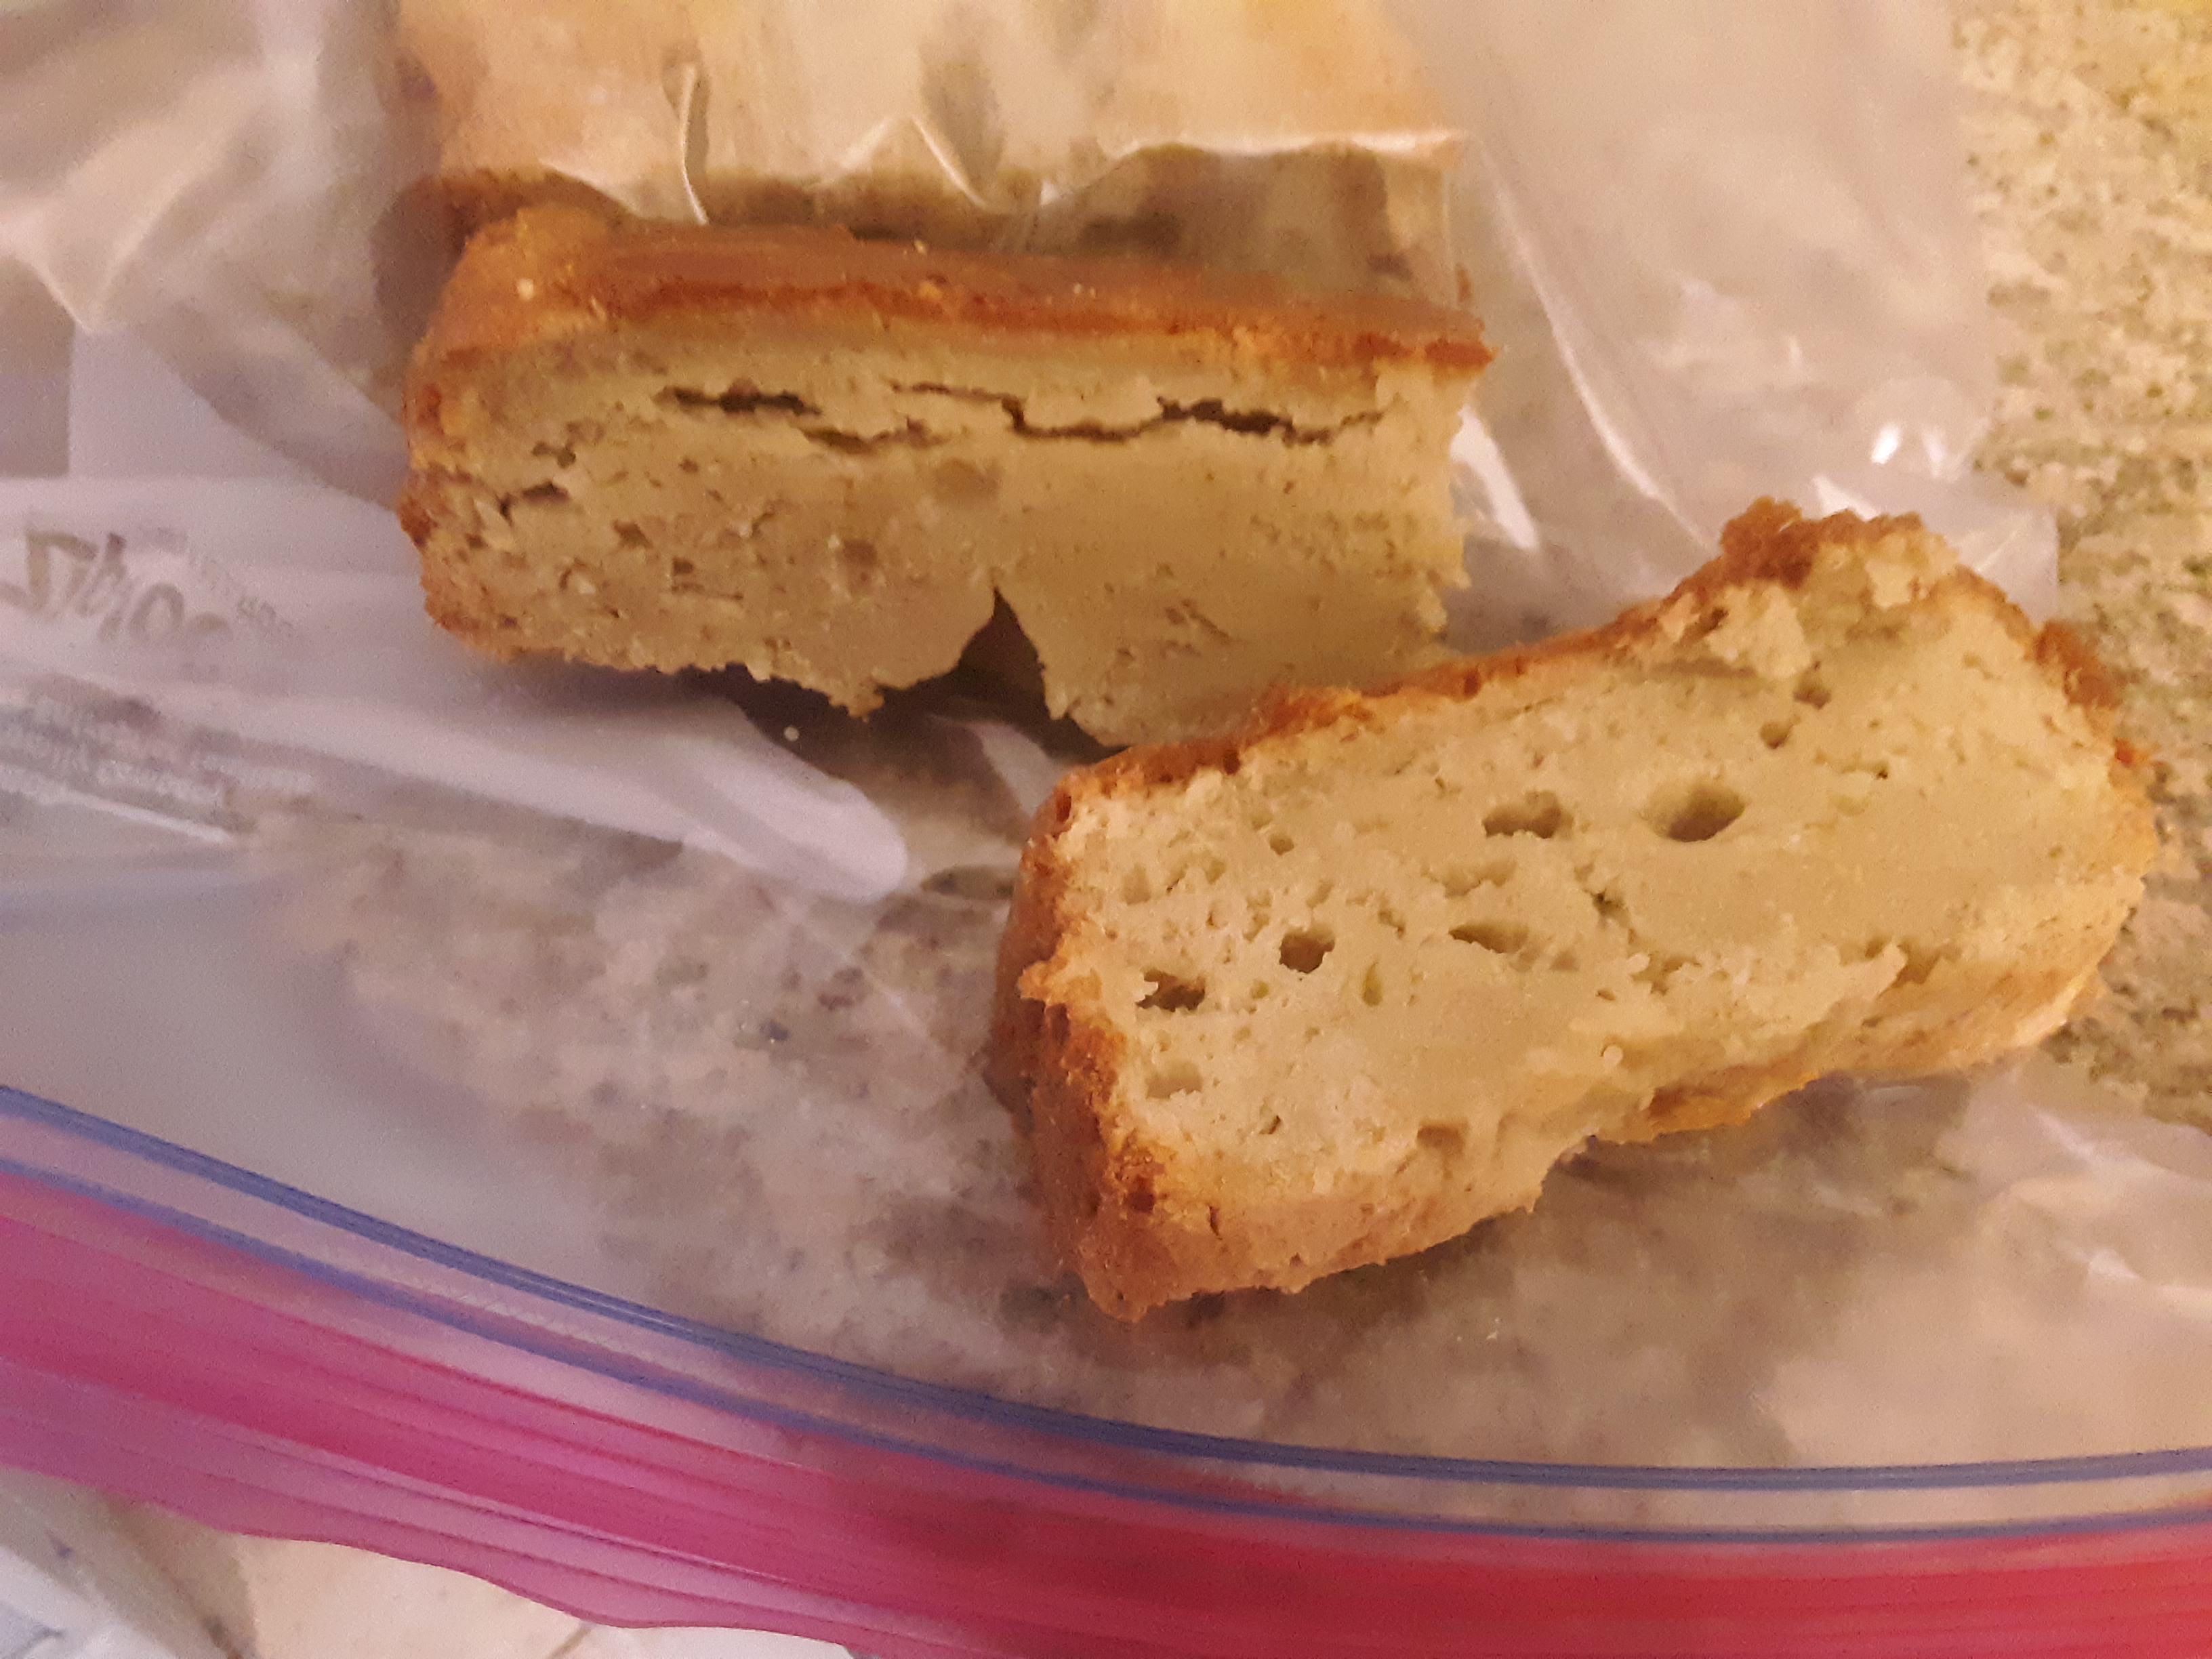 Living well in the 21st century - Limassol, Cyprus - picture of gluten free bread with air bubbles in the middle. The bread is placed on top of a ziplock bag.  